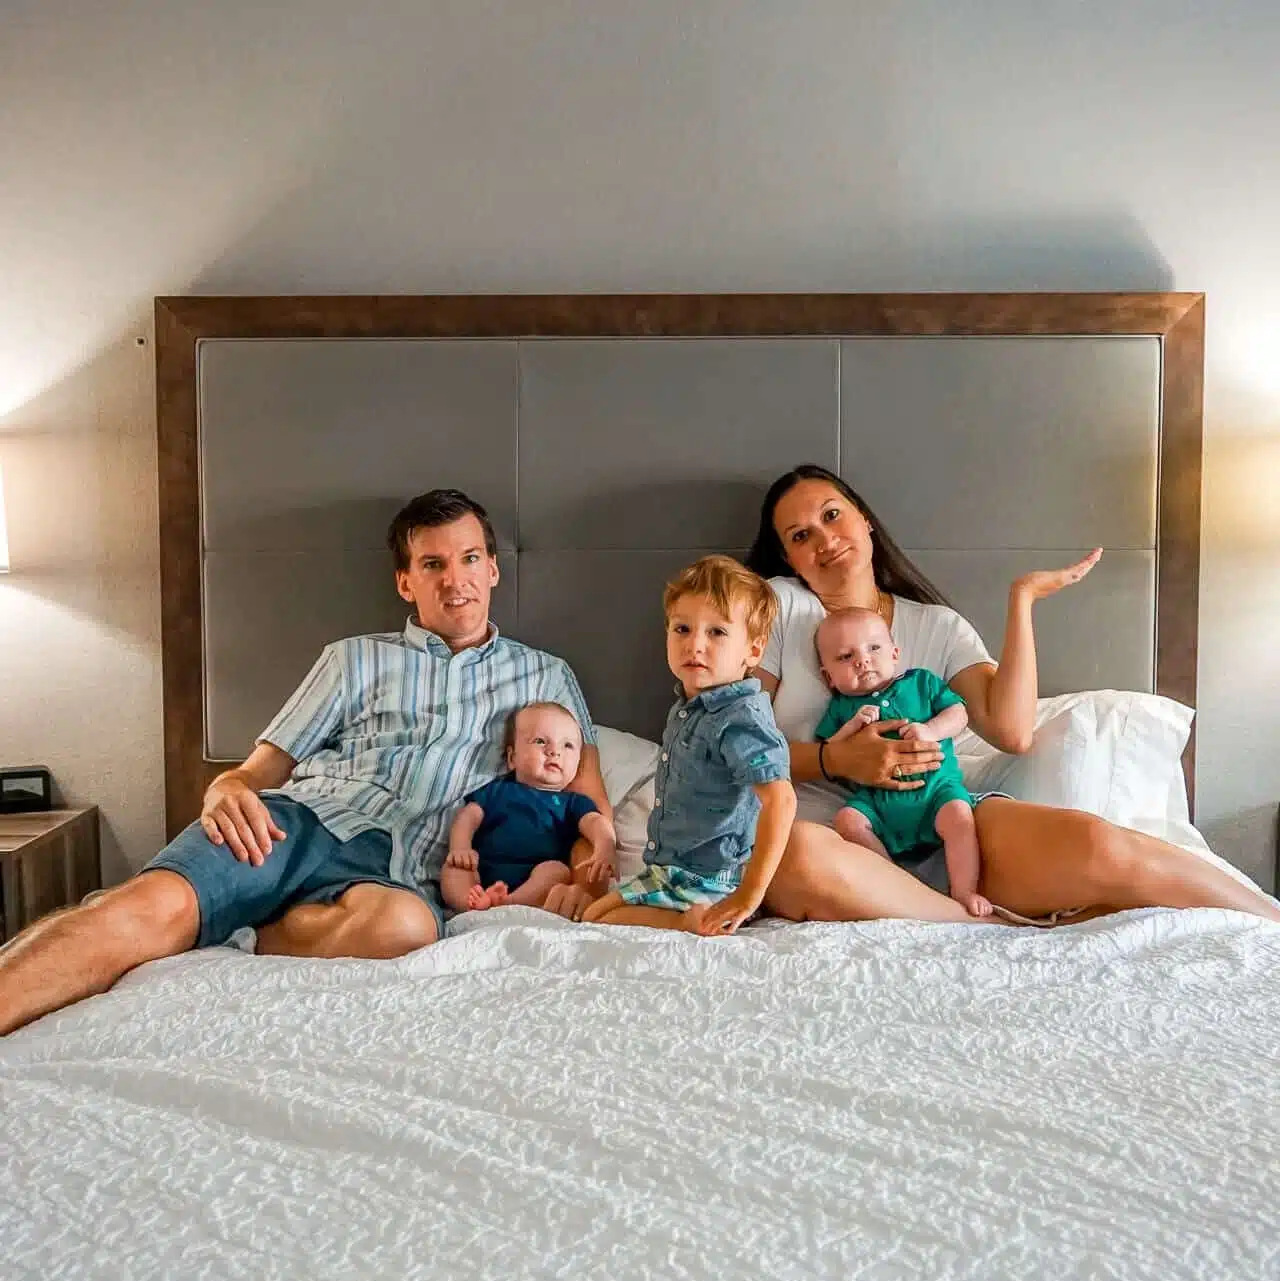 Parents sitting on the bed looking lost traveling with twins and a toddler.